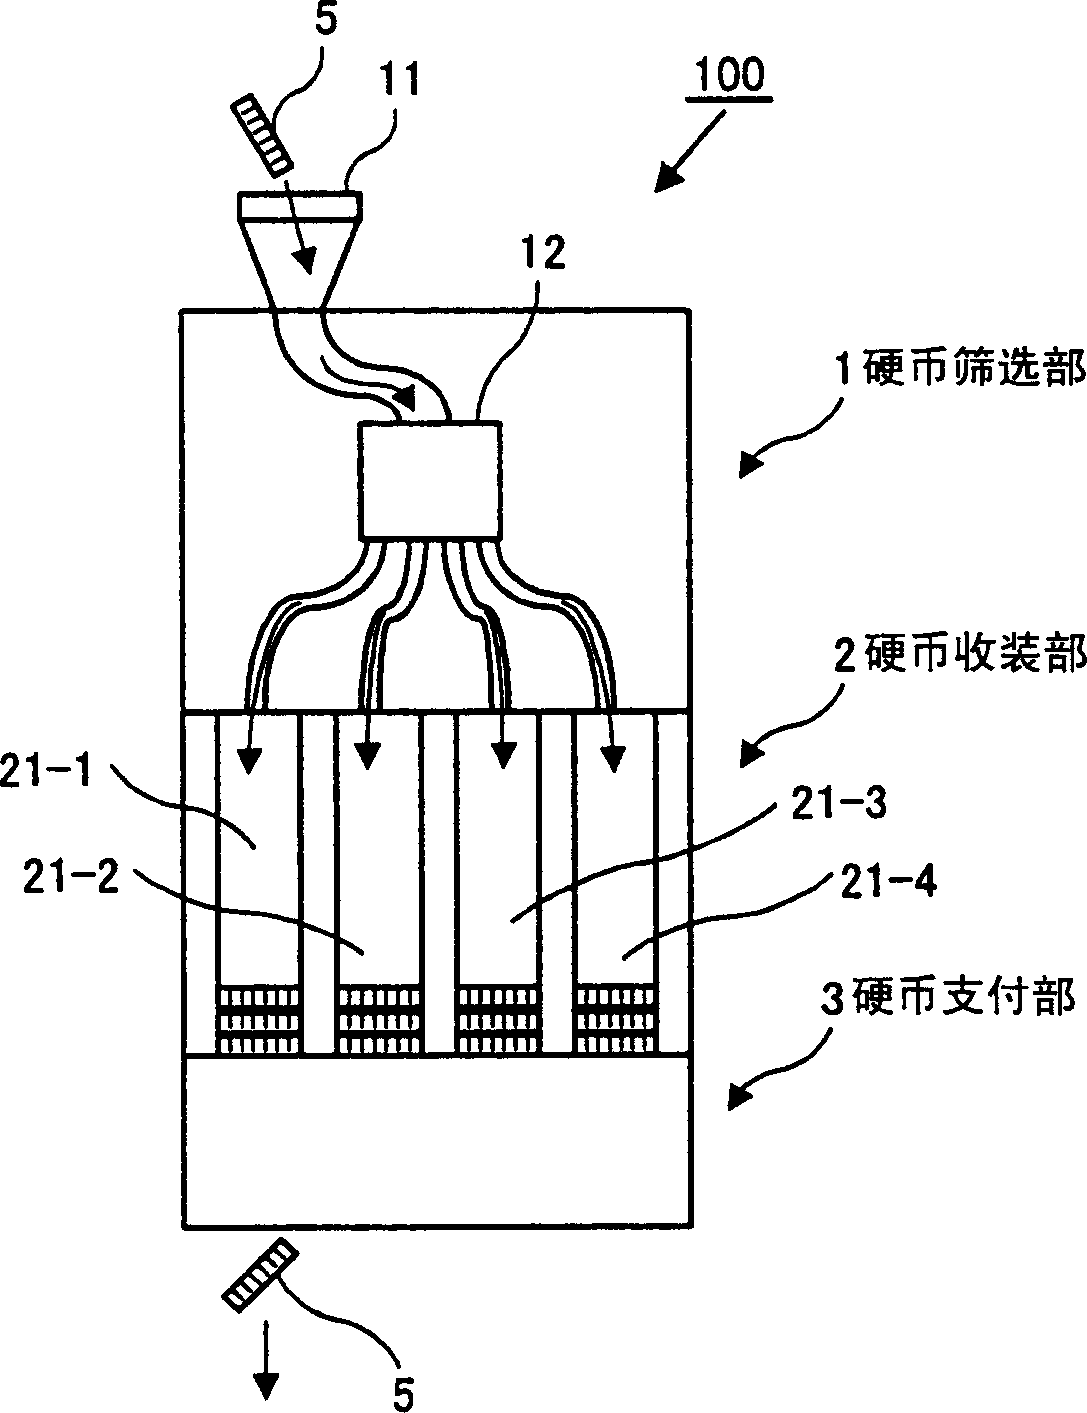 Coin dispenser and control method for the coin dispenser